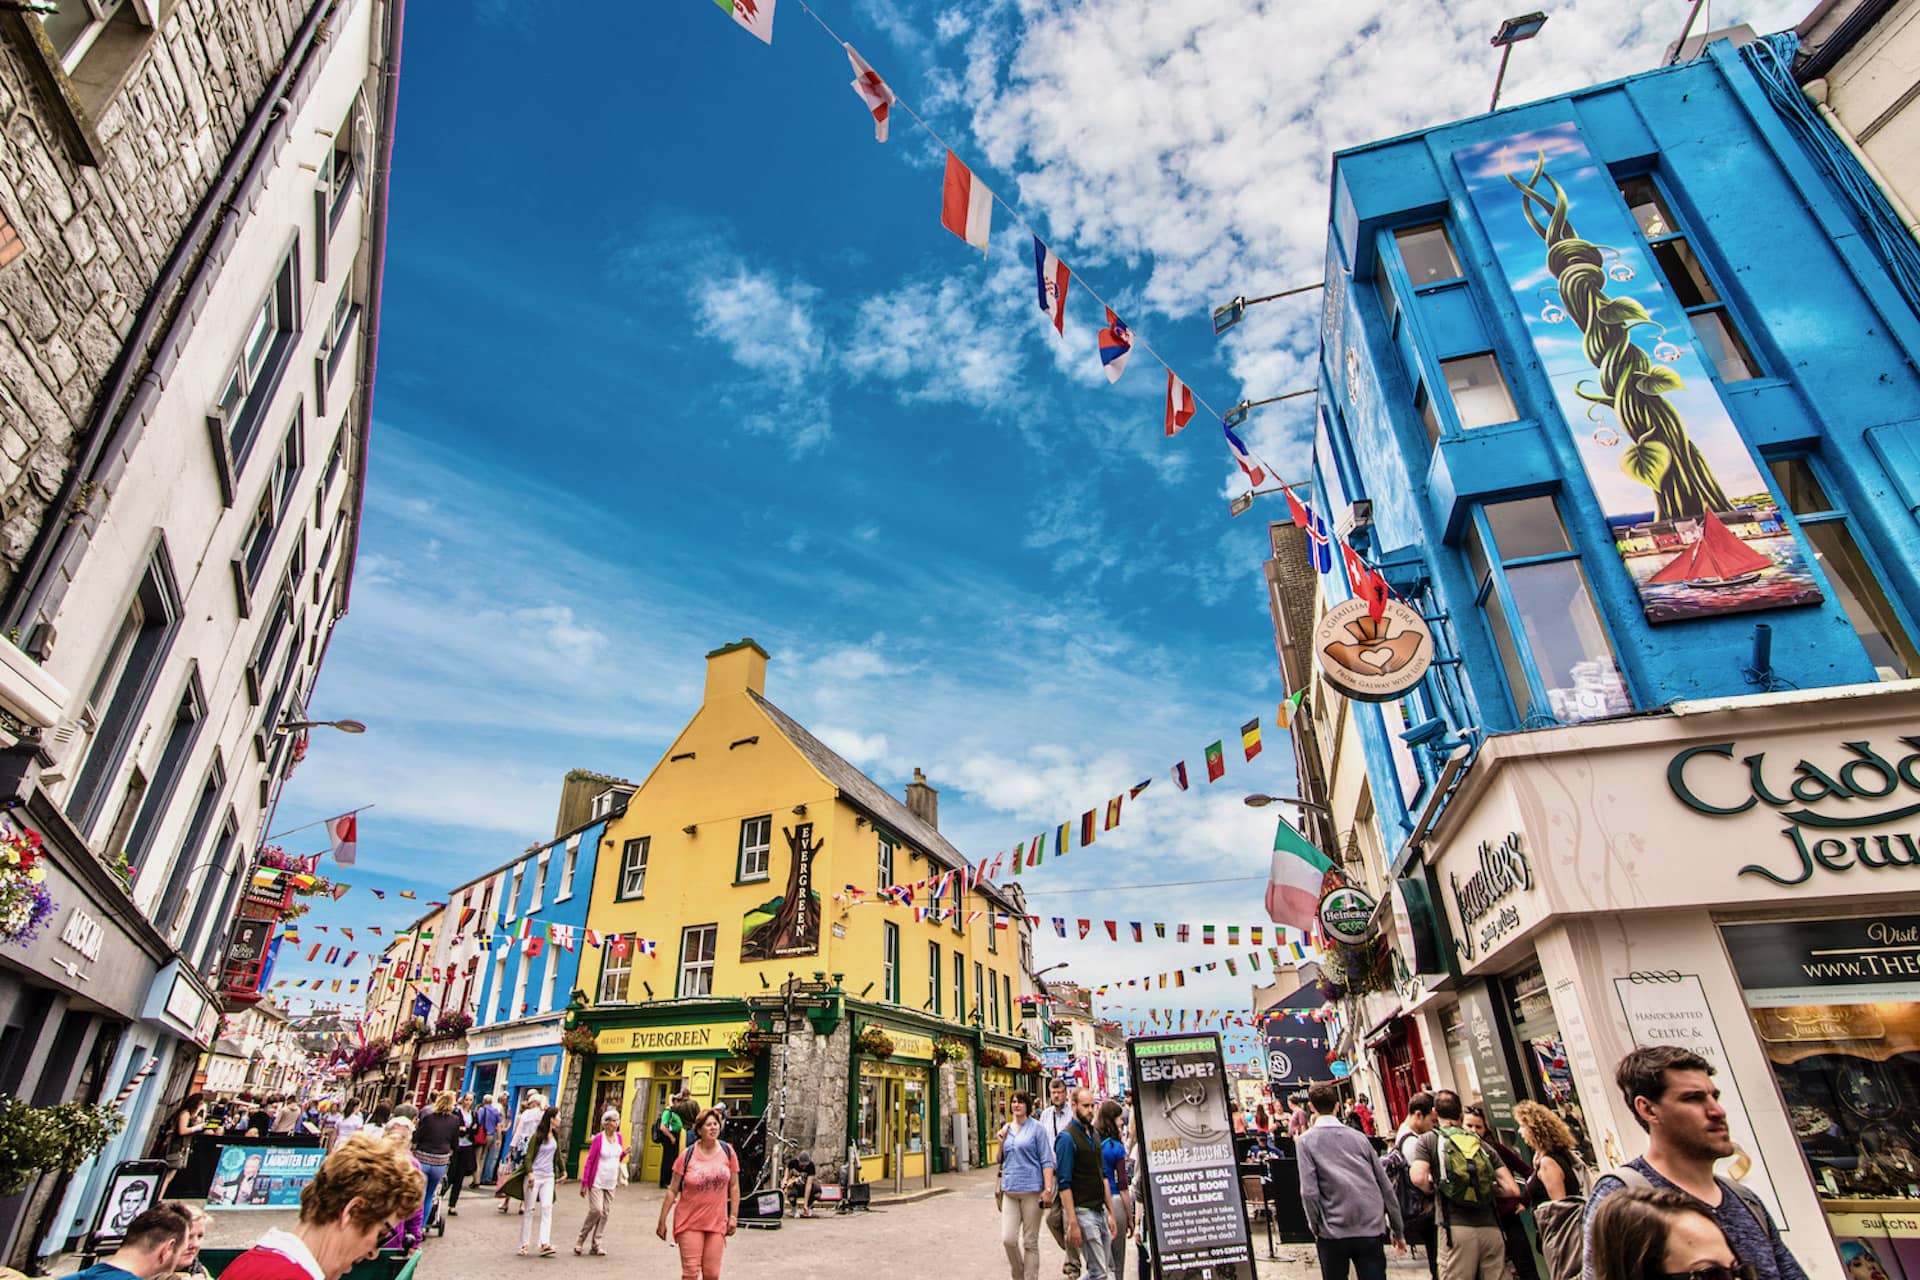 Cheapest Places to Travel In The World - Galway Ireland